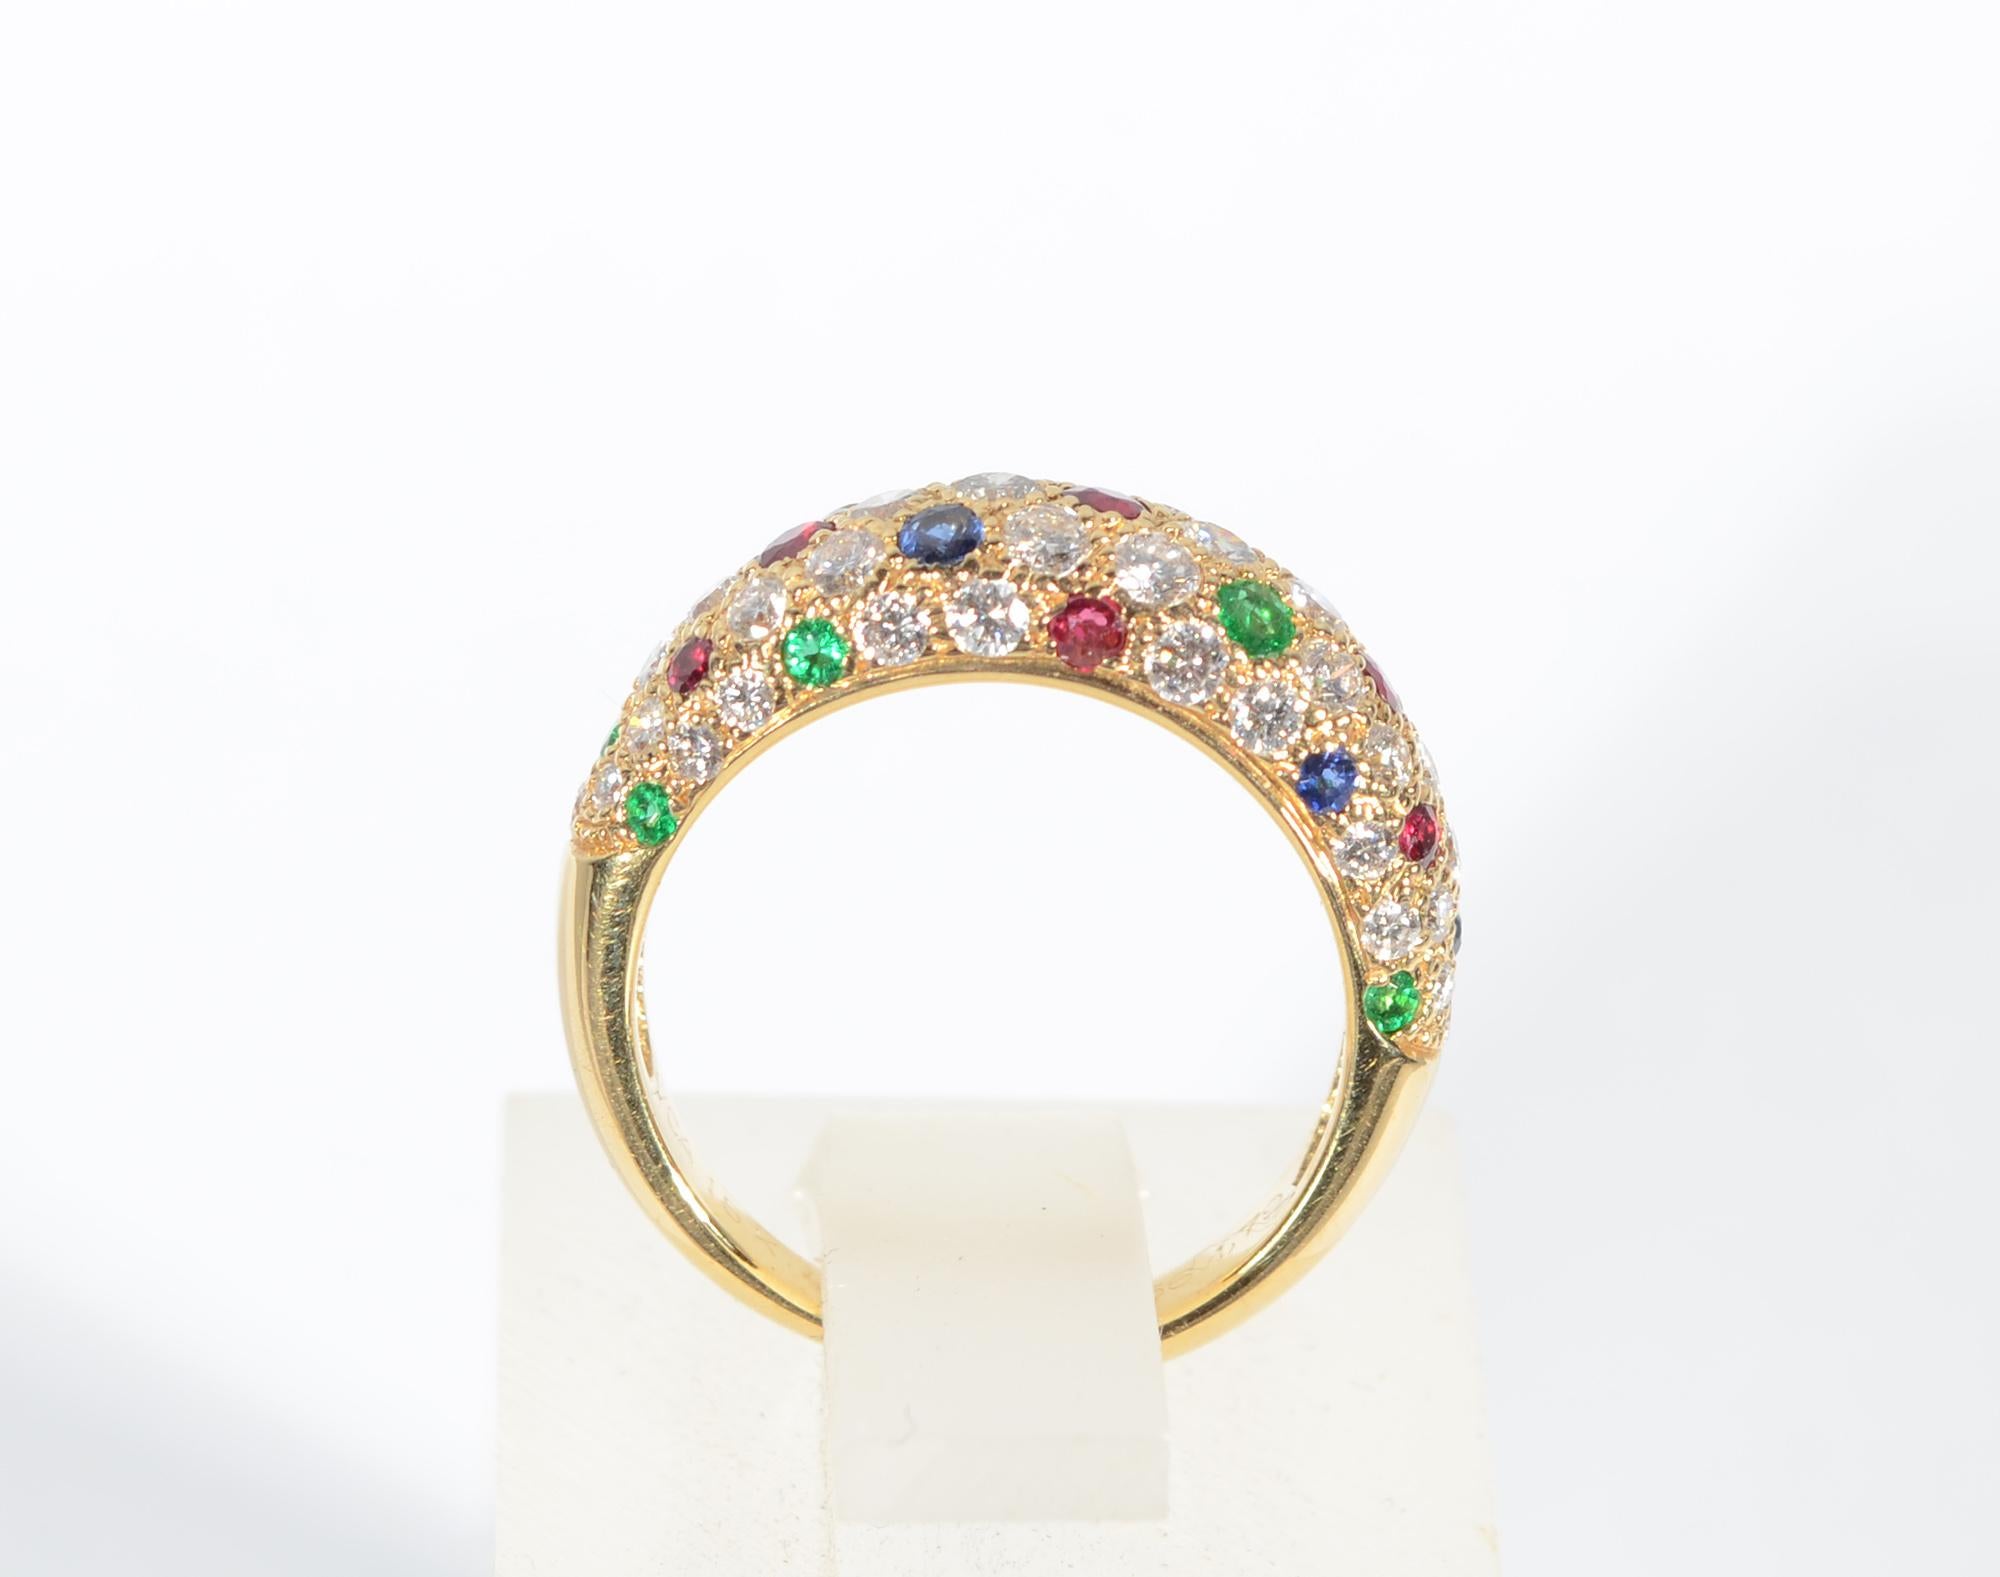 Elegant diamond band ring interspersed with rubies; sapphires and emeralds by the premier jewelry house, Van Cleef and Arpels. The ring measures 1/4